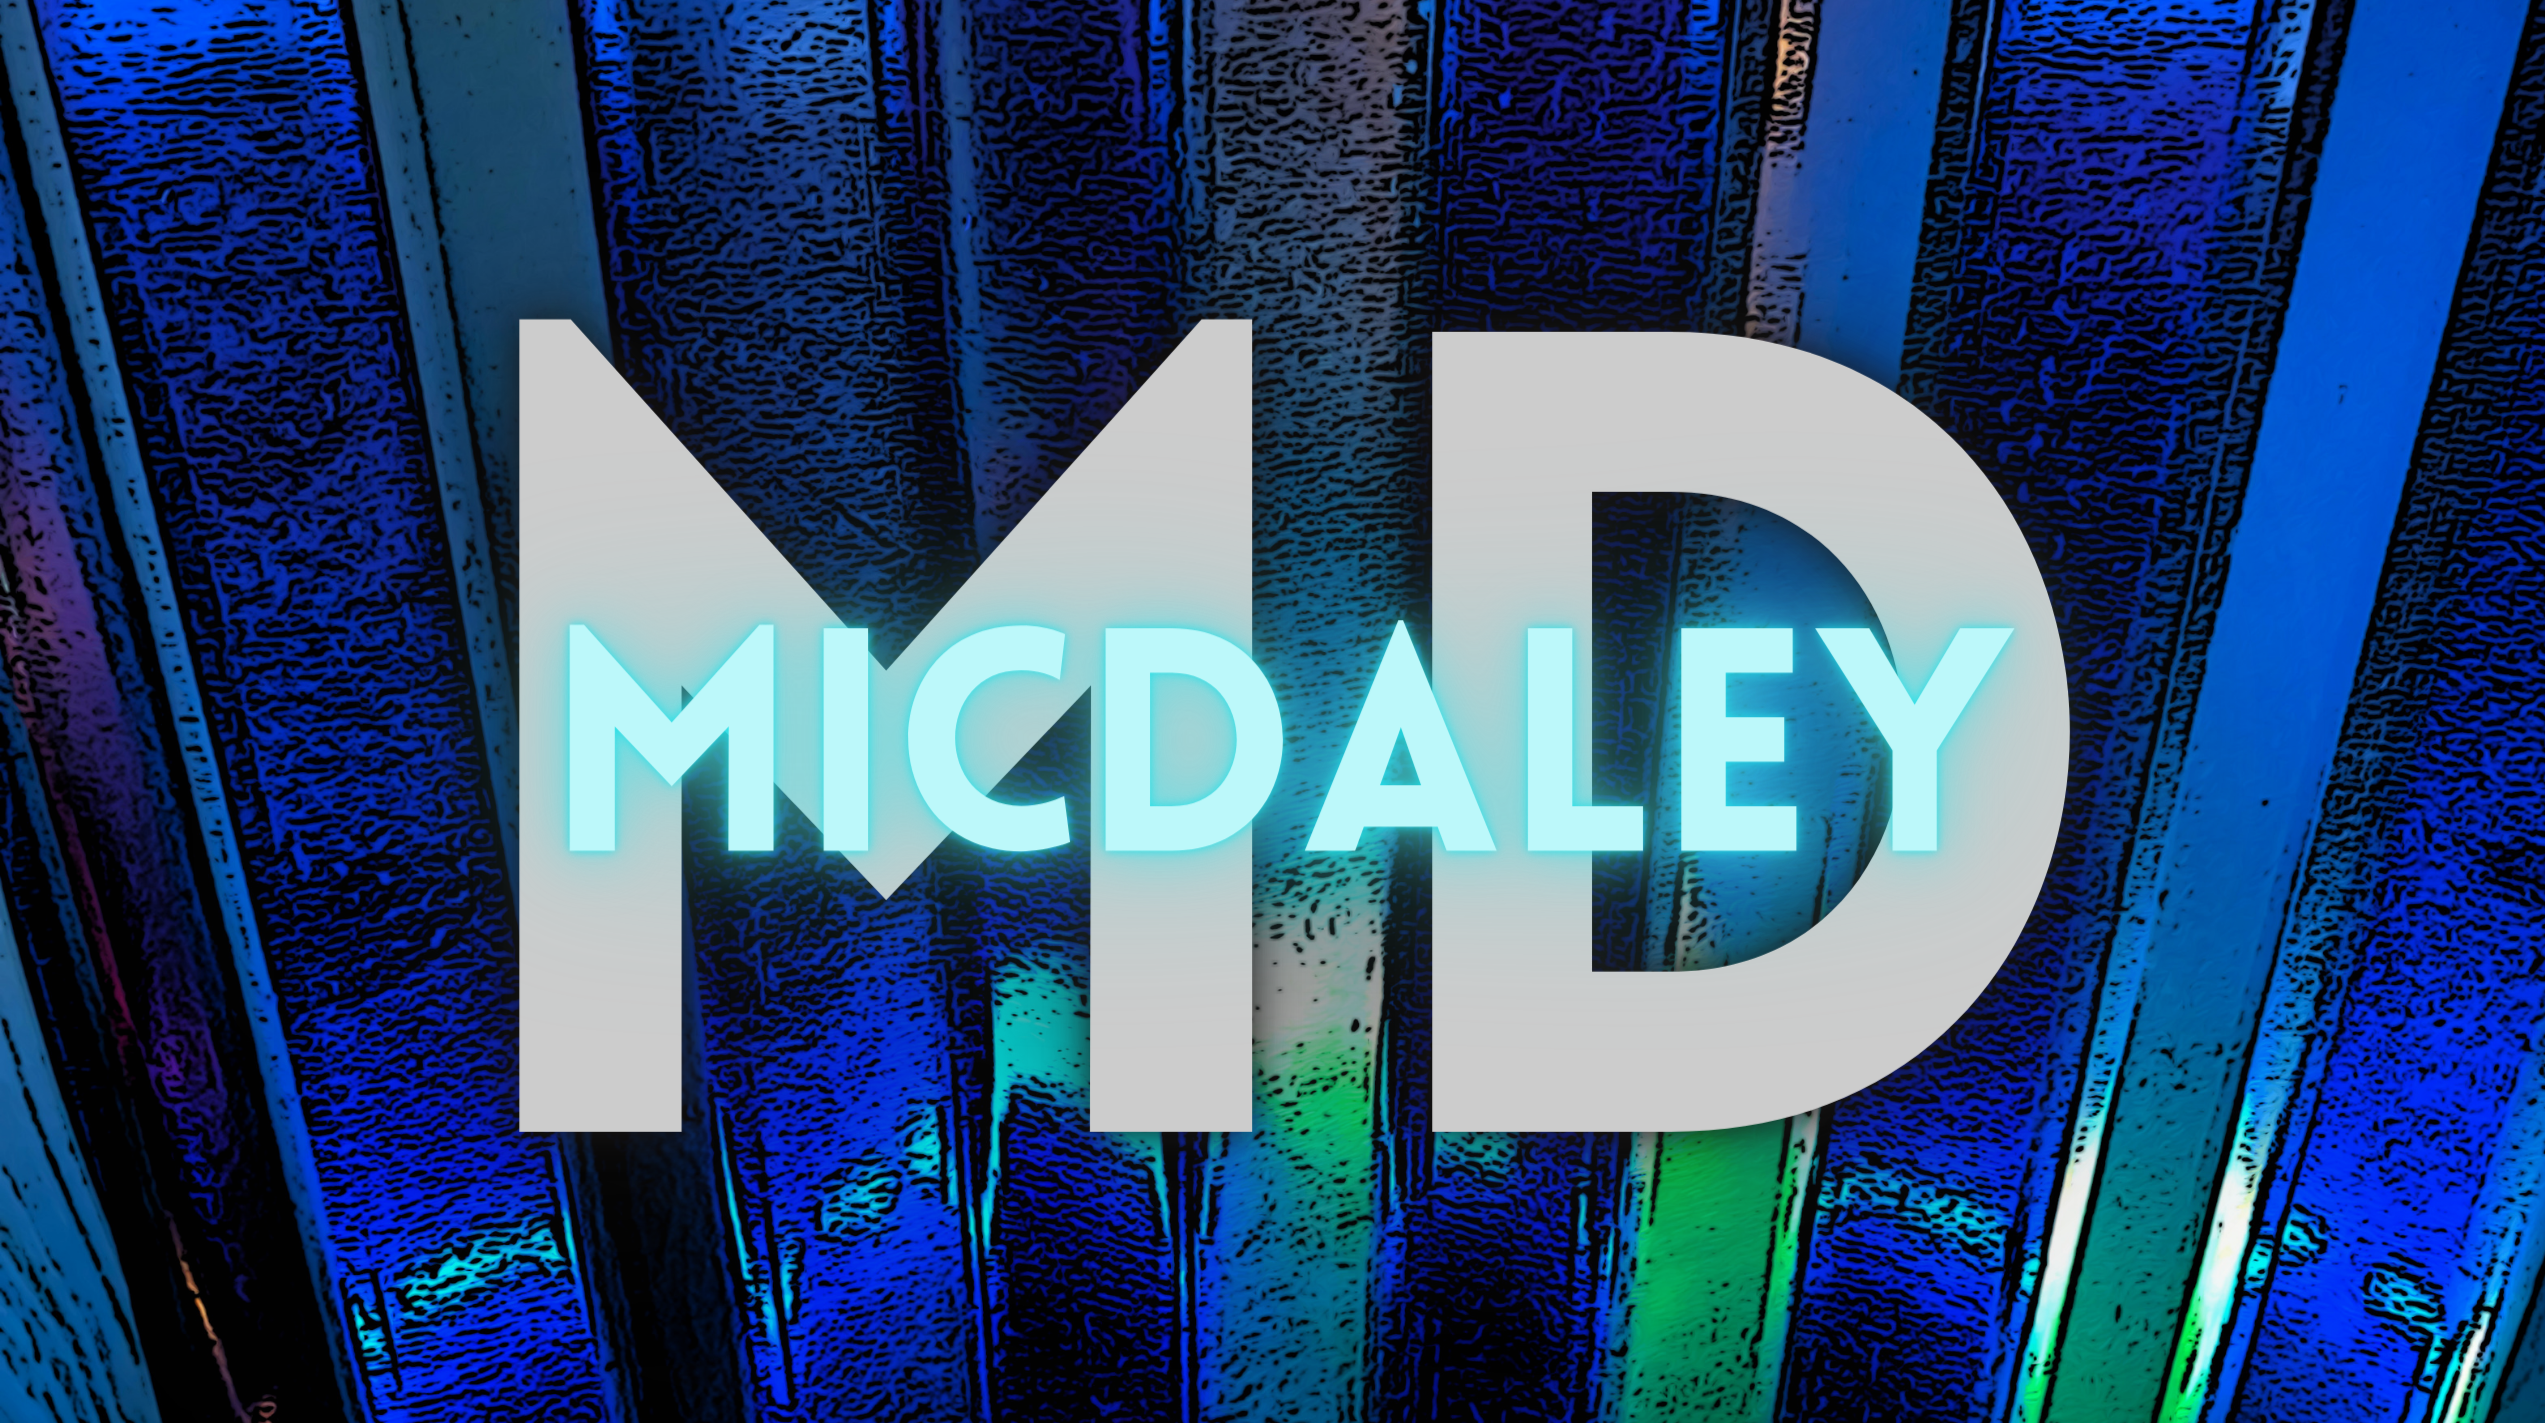 MICDALEY